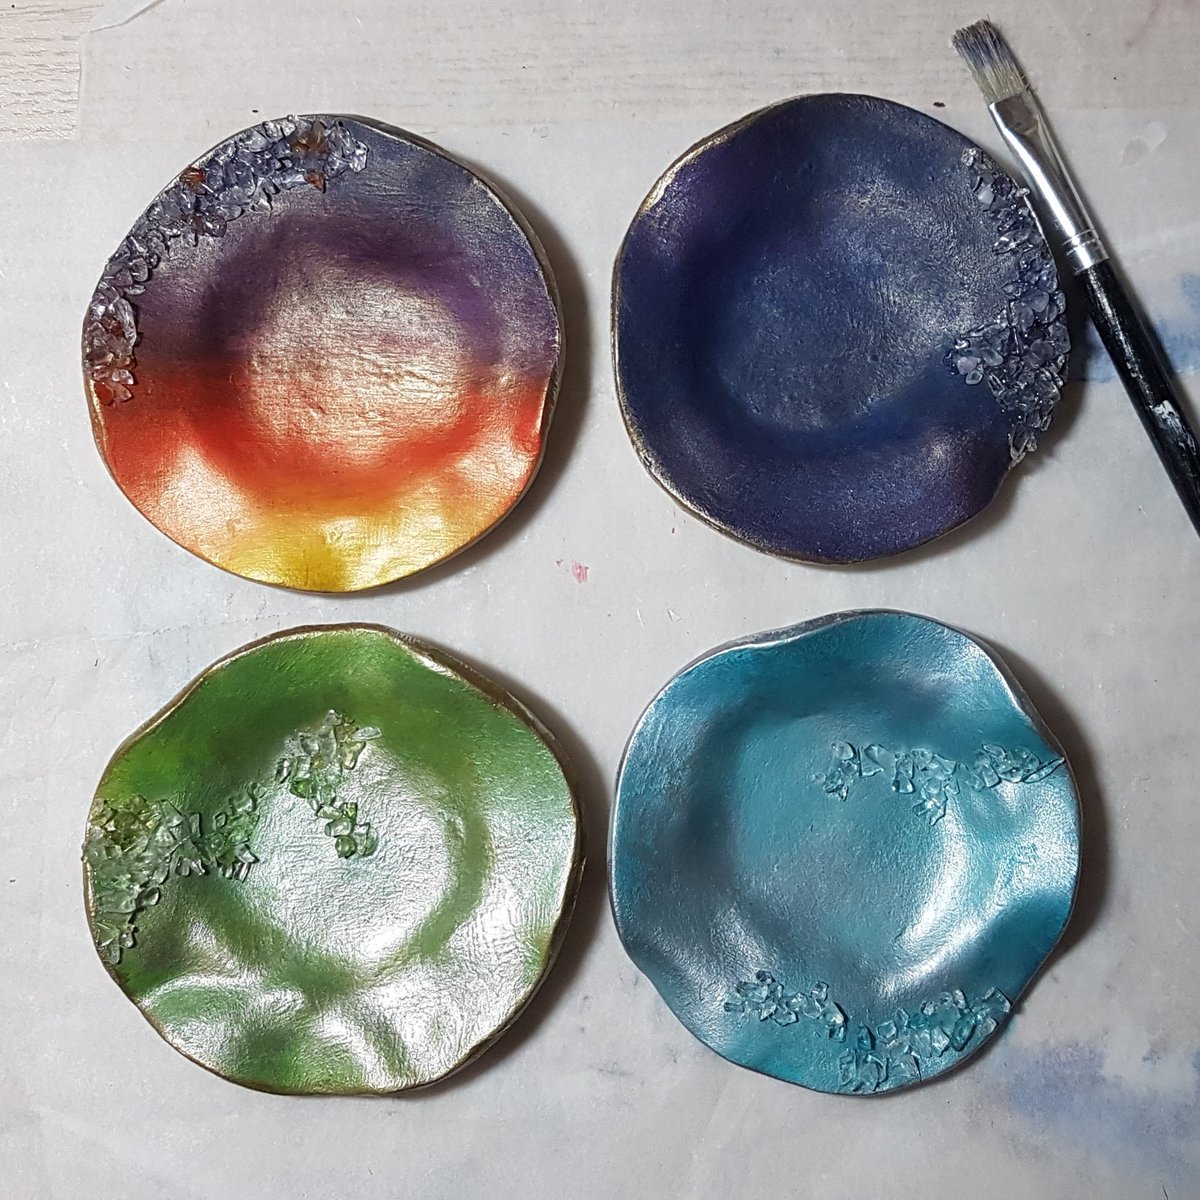 Which is your favorite colour? Sunset Rainbow, Blue Purple, Teal or Chartreuse? #ringdish #keepsakedish #polymerclay